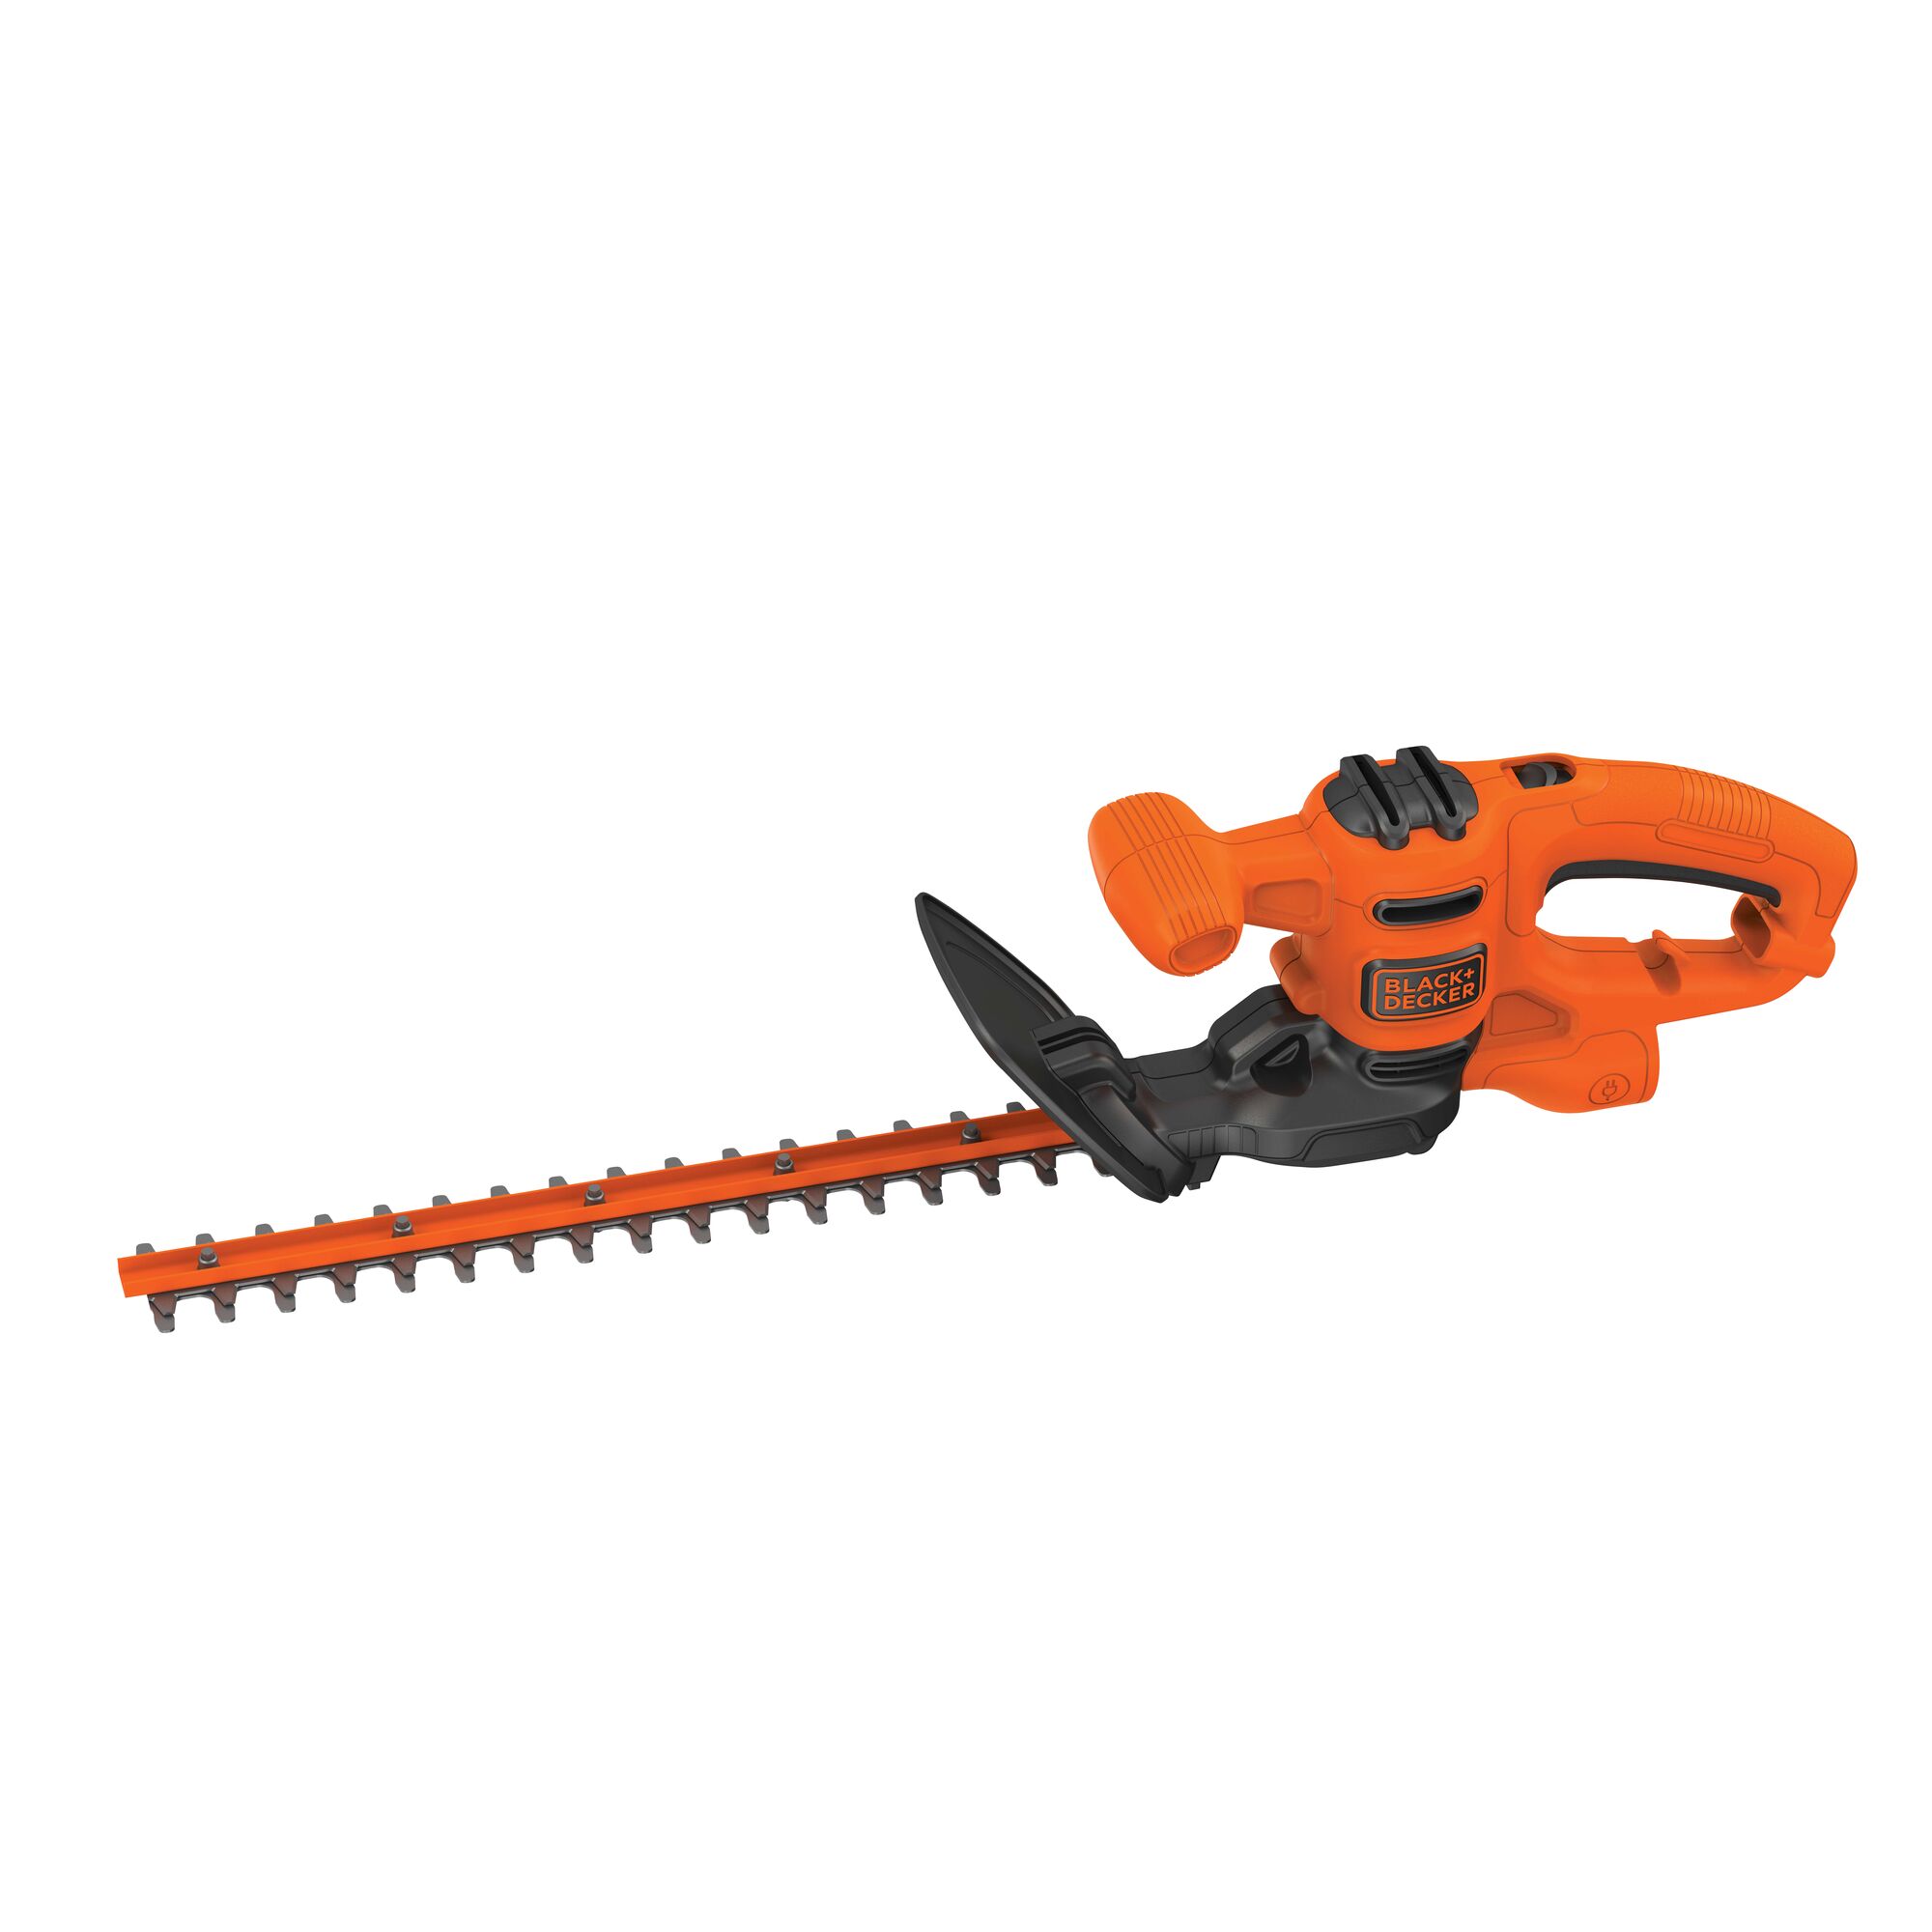 Profile of 16 inch electric hedge trimmer.